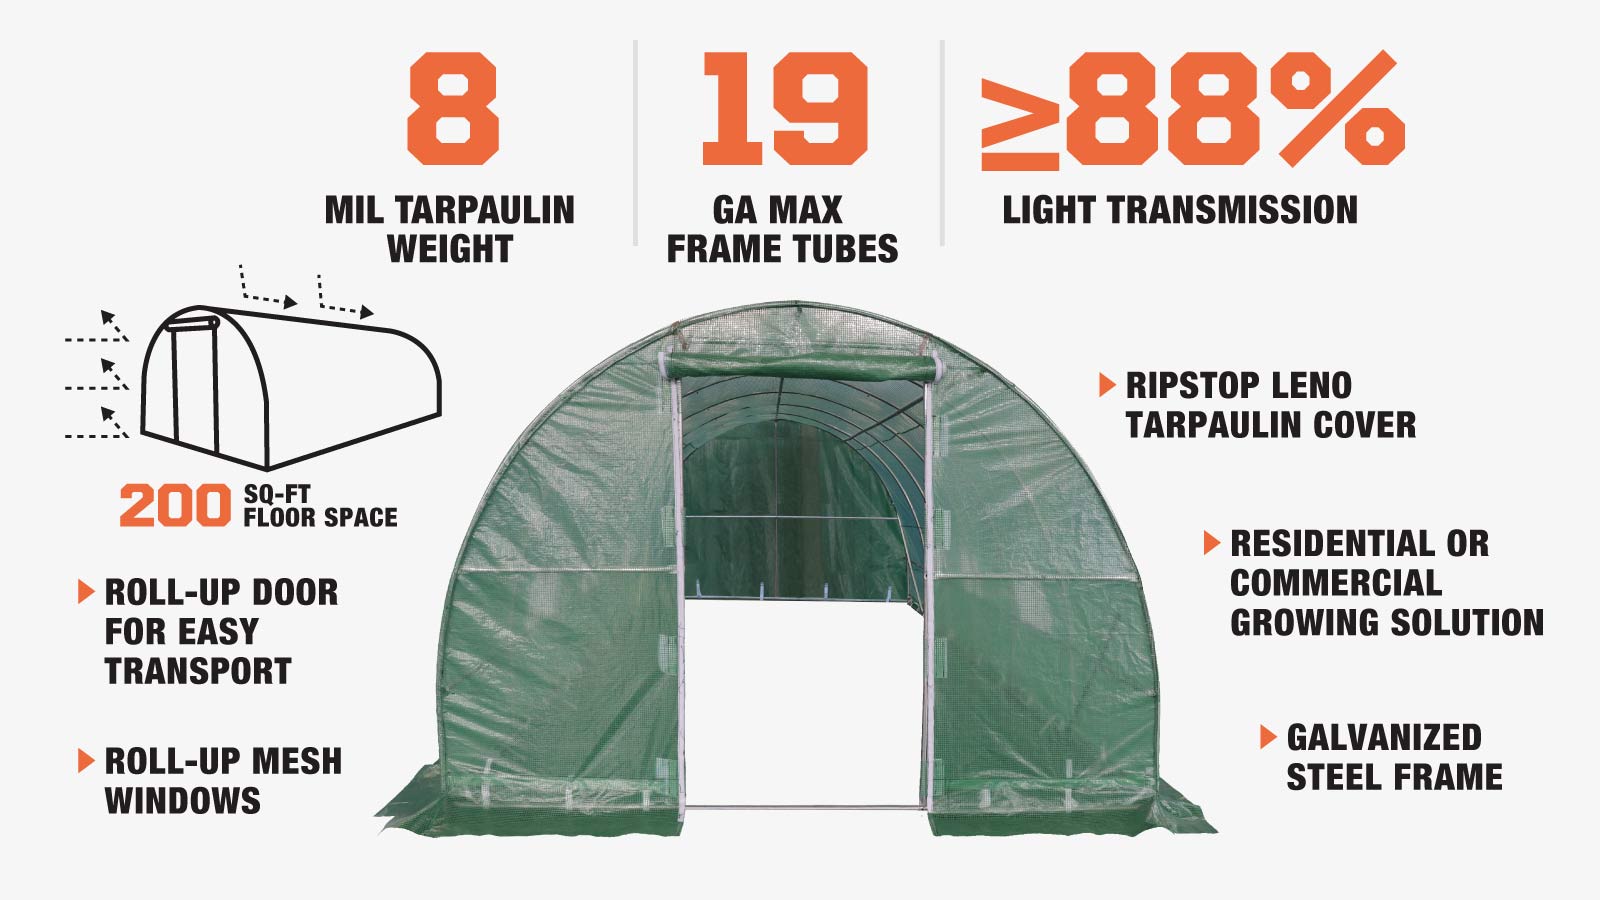 TMG Industrial 10’ x 20’ Tunnel Greenhouse Grow Tent w/Ripstop Leno Cover, Cold Frame, Roll-Up Mesh Windows, Round Top Roof, TMG-GH1020R-description-image